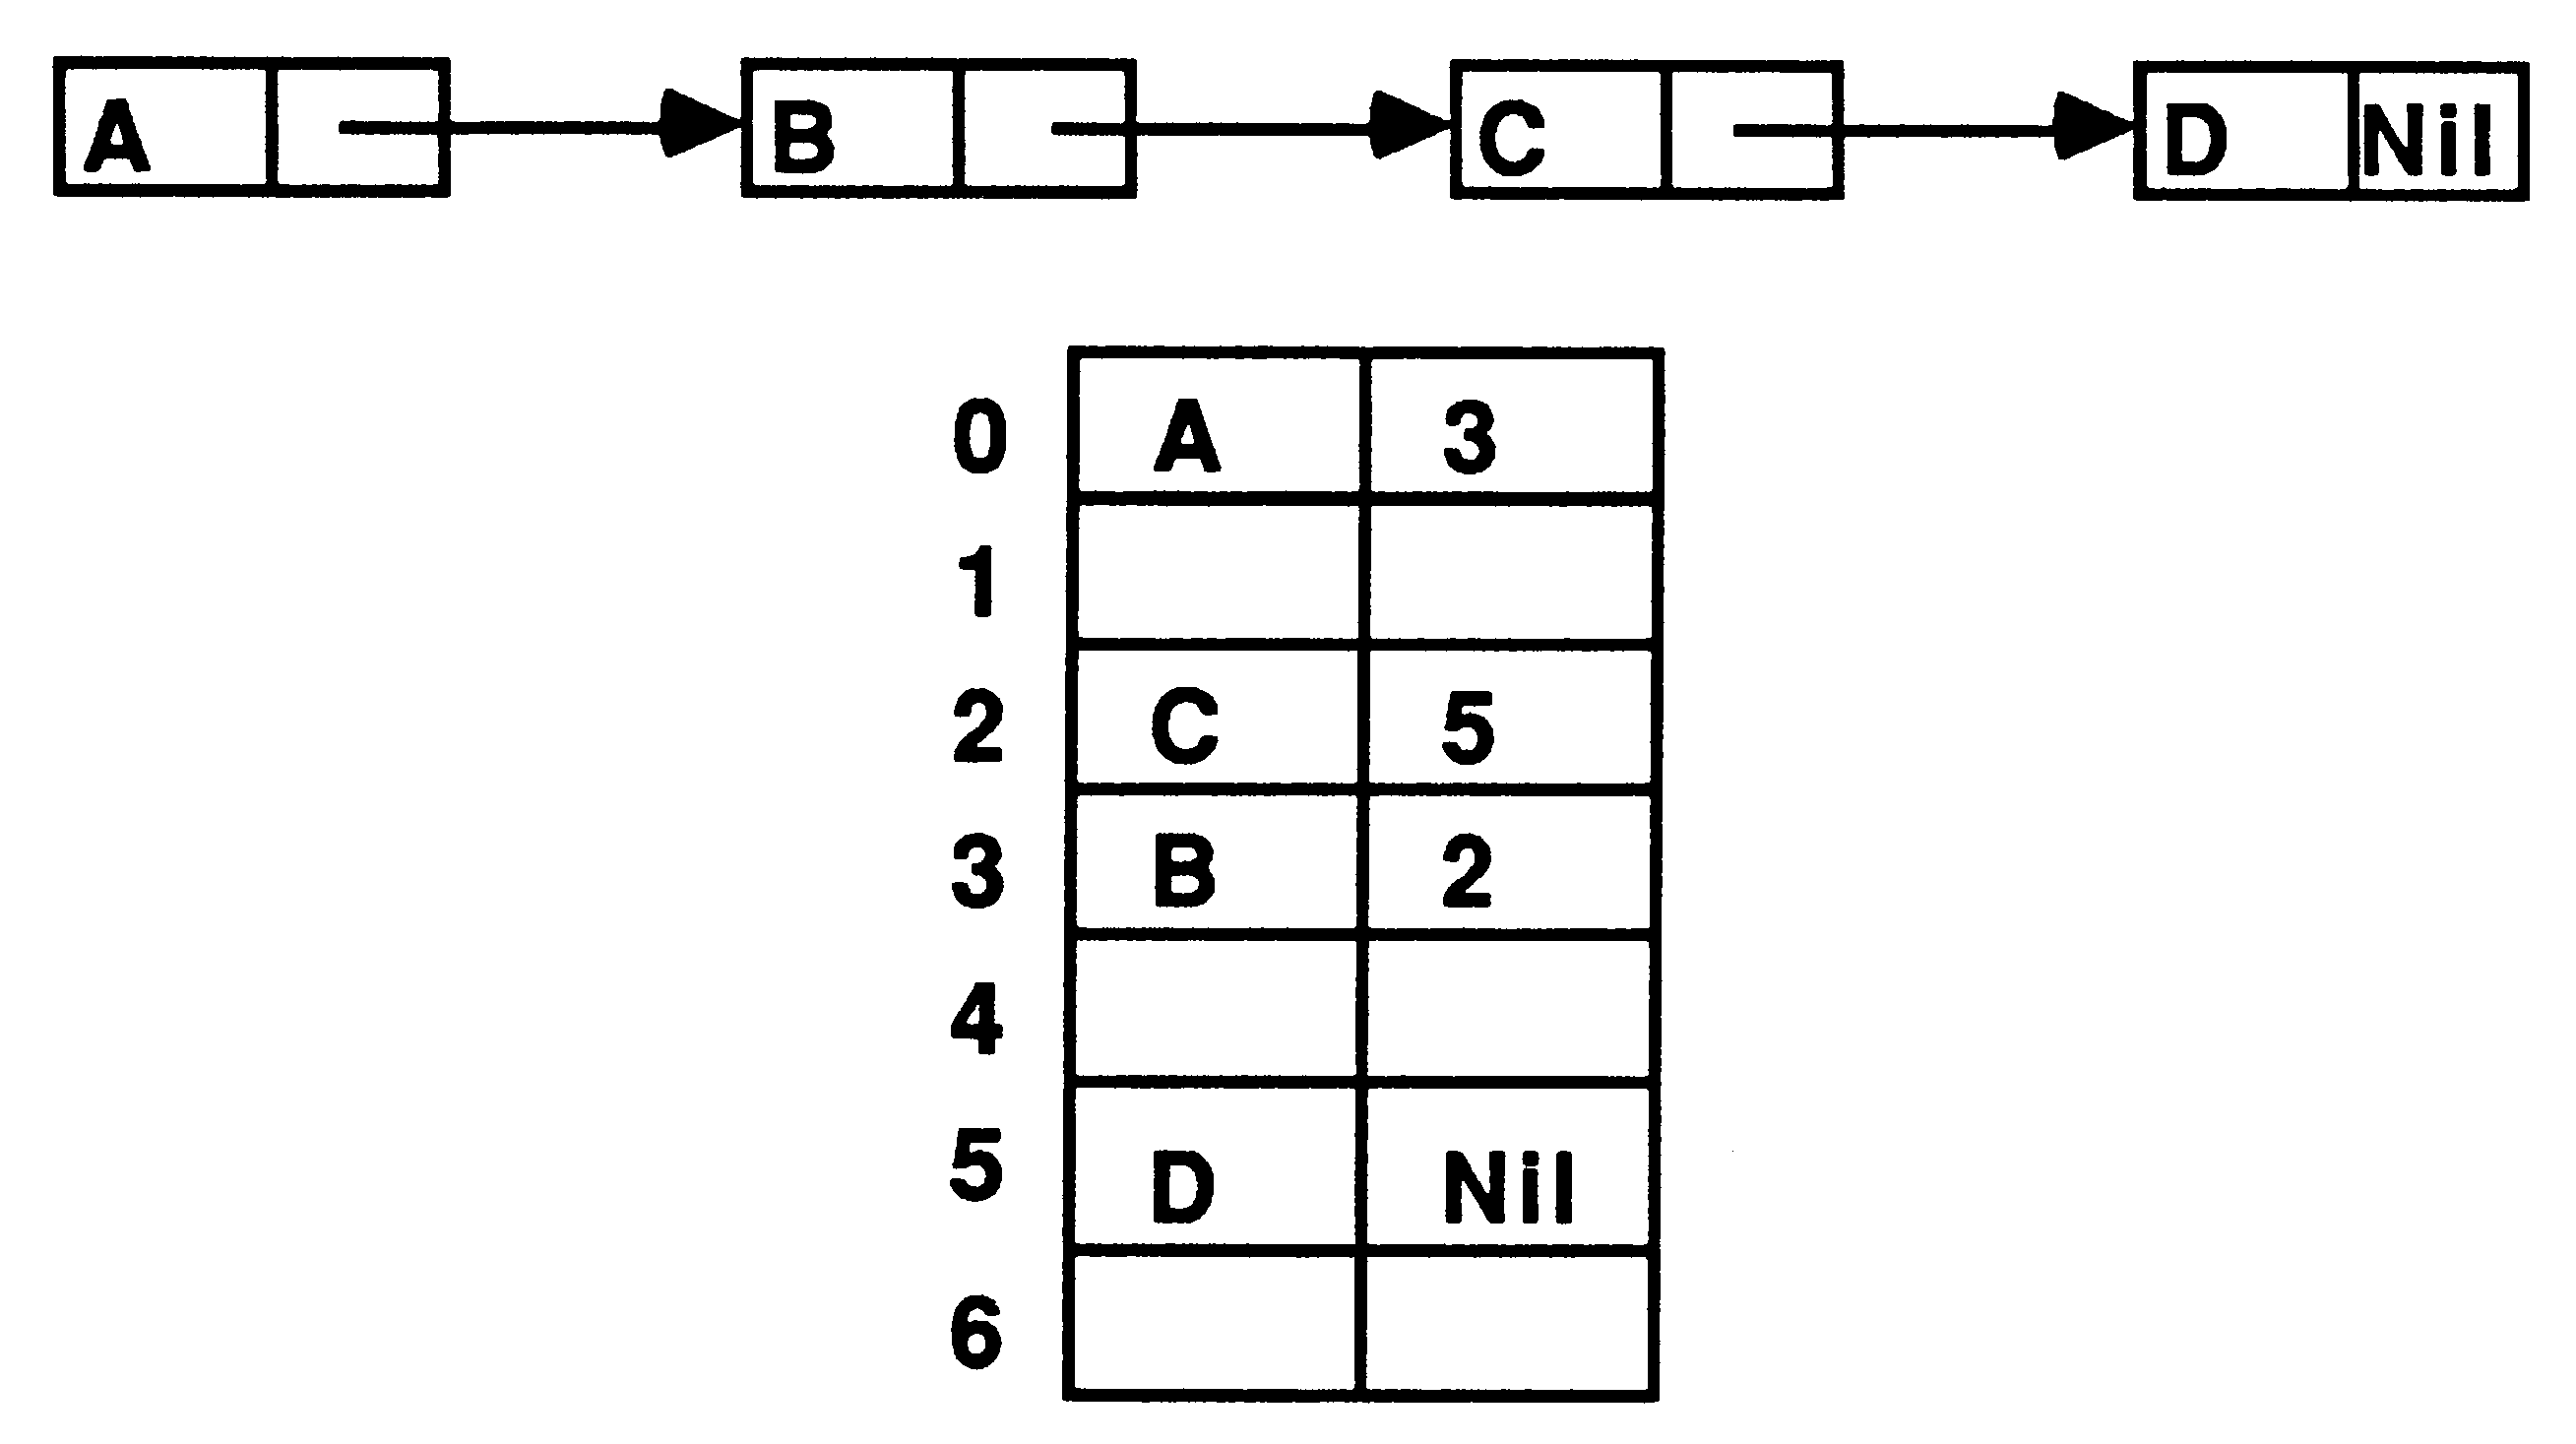 An implementation example